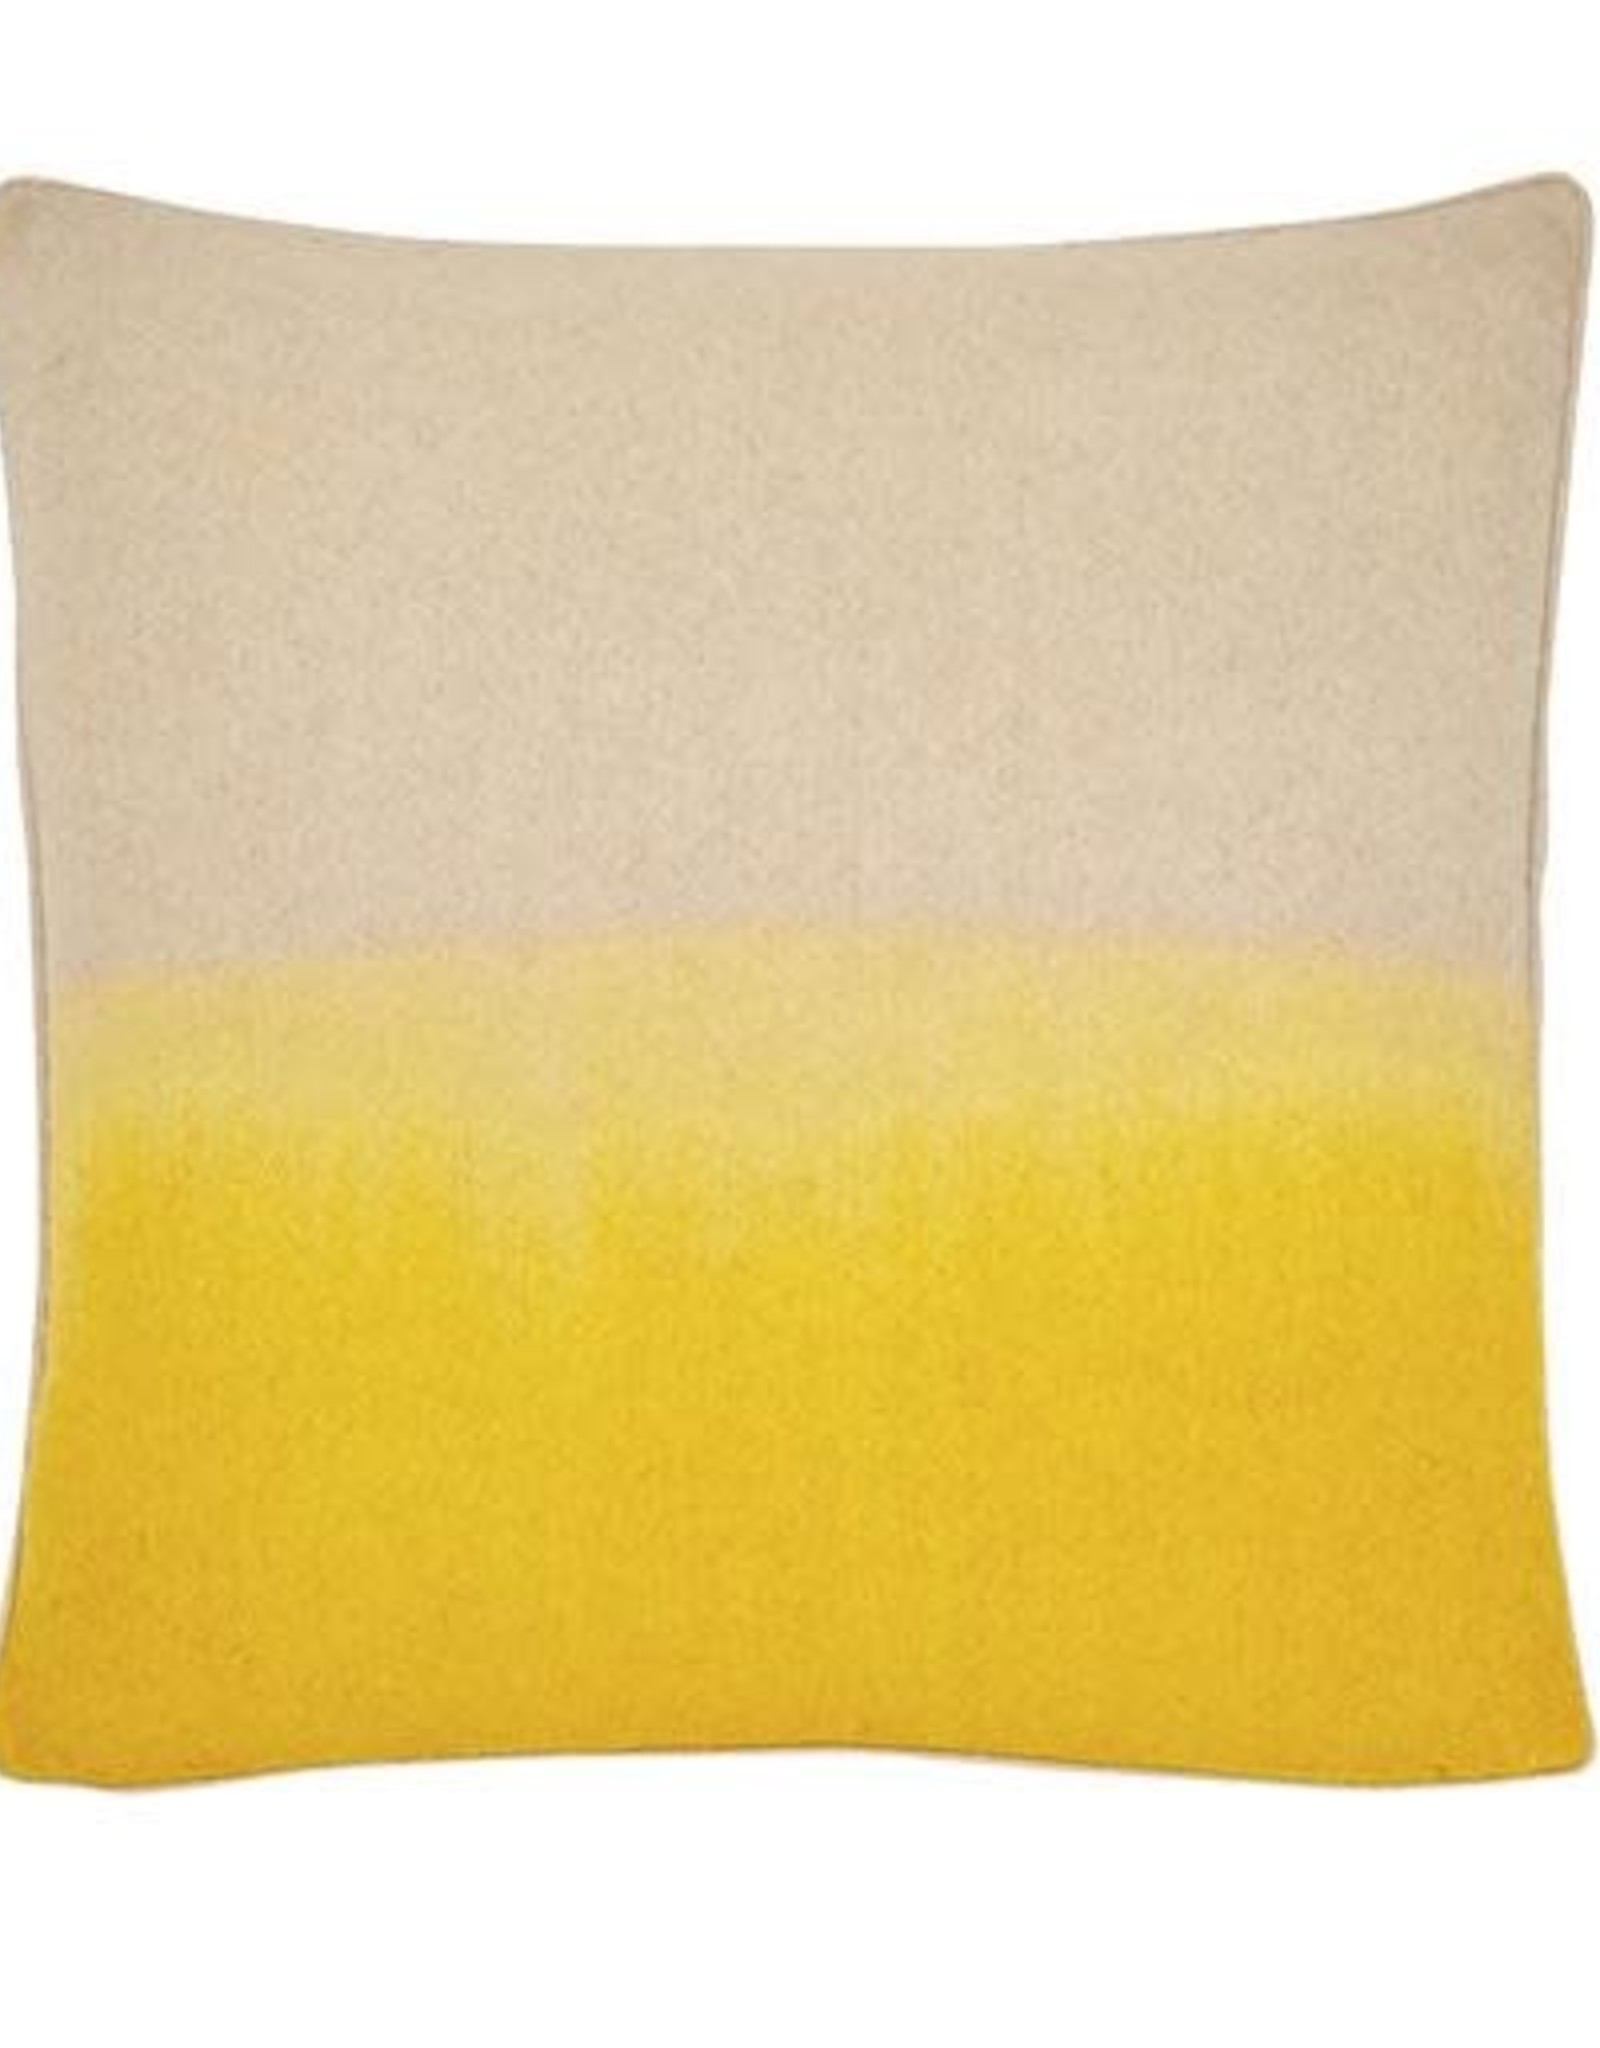 Jenkins Pillow - Yellow Ombre 22x22